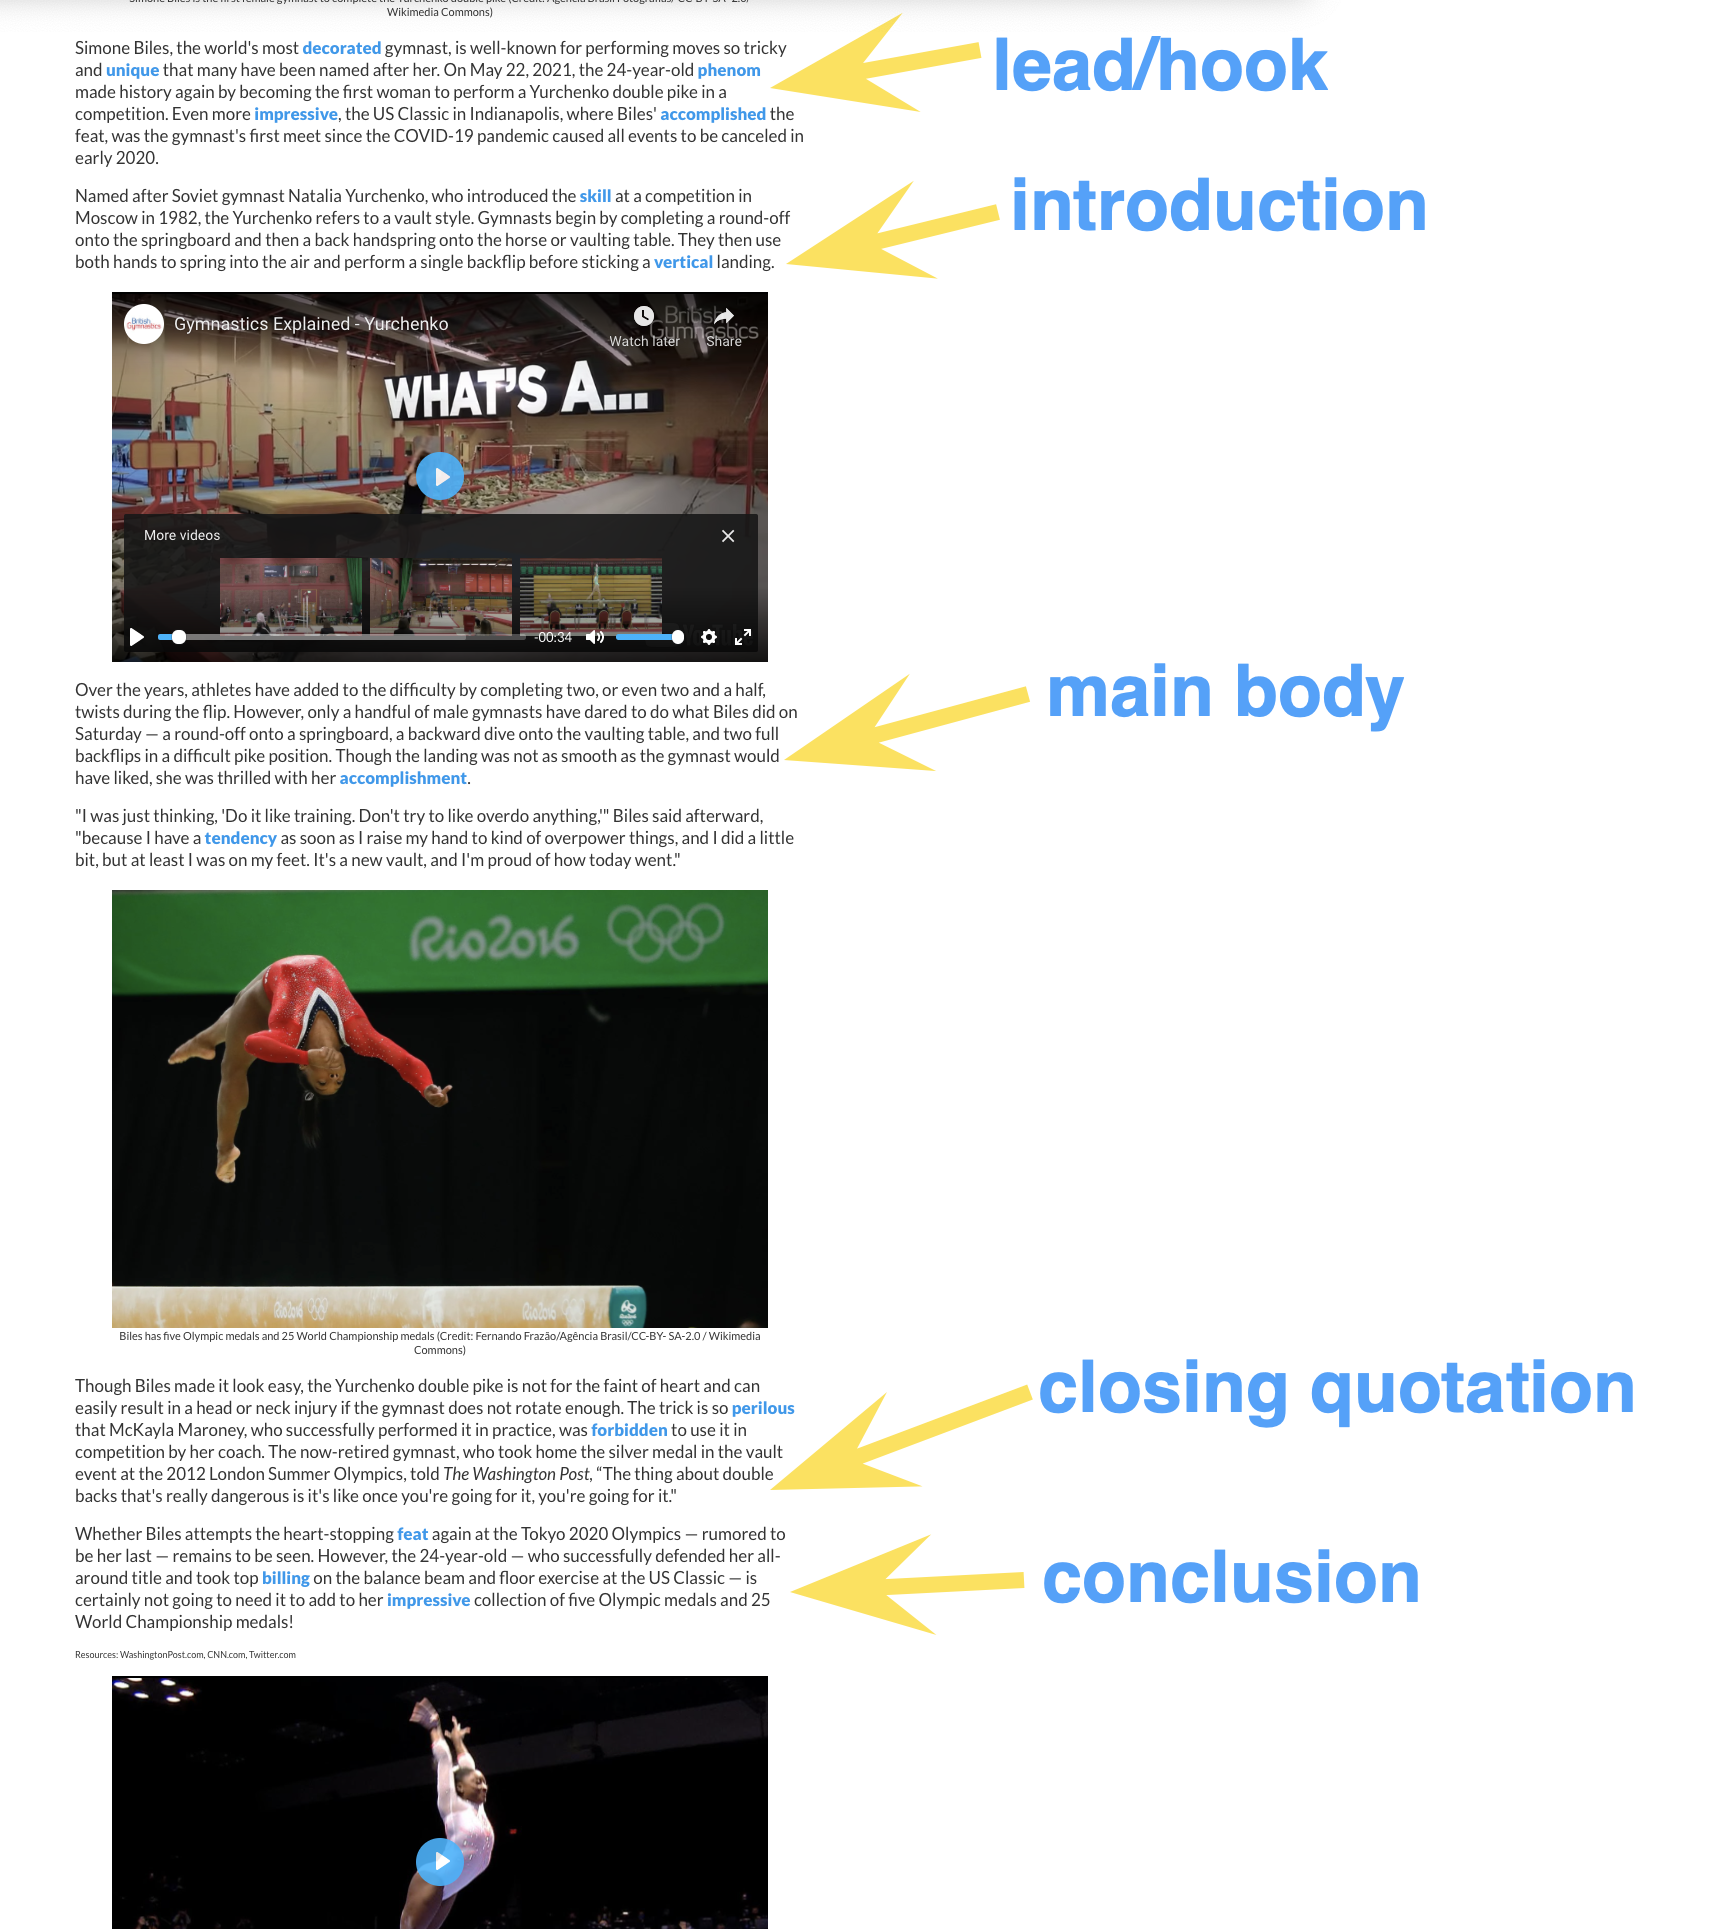 annotated news article with arrows pointing out hook, introduction, main body, closing quotation and conclusion sections in the article